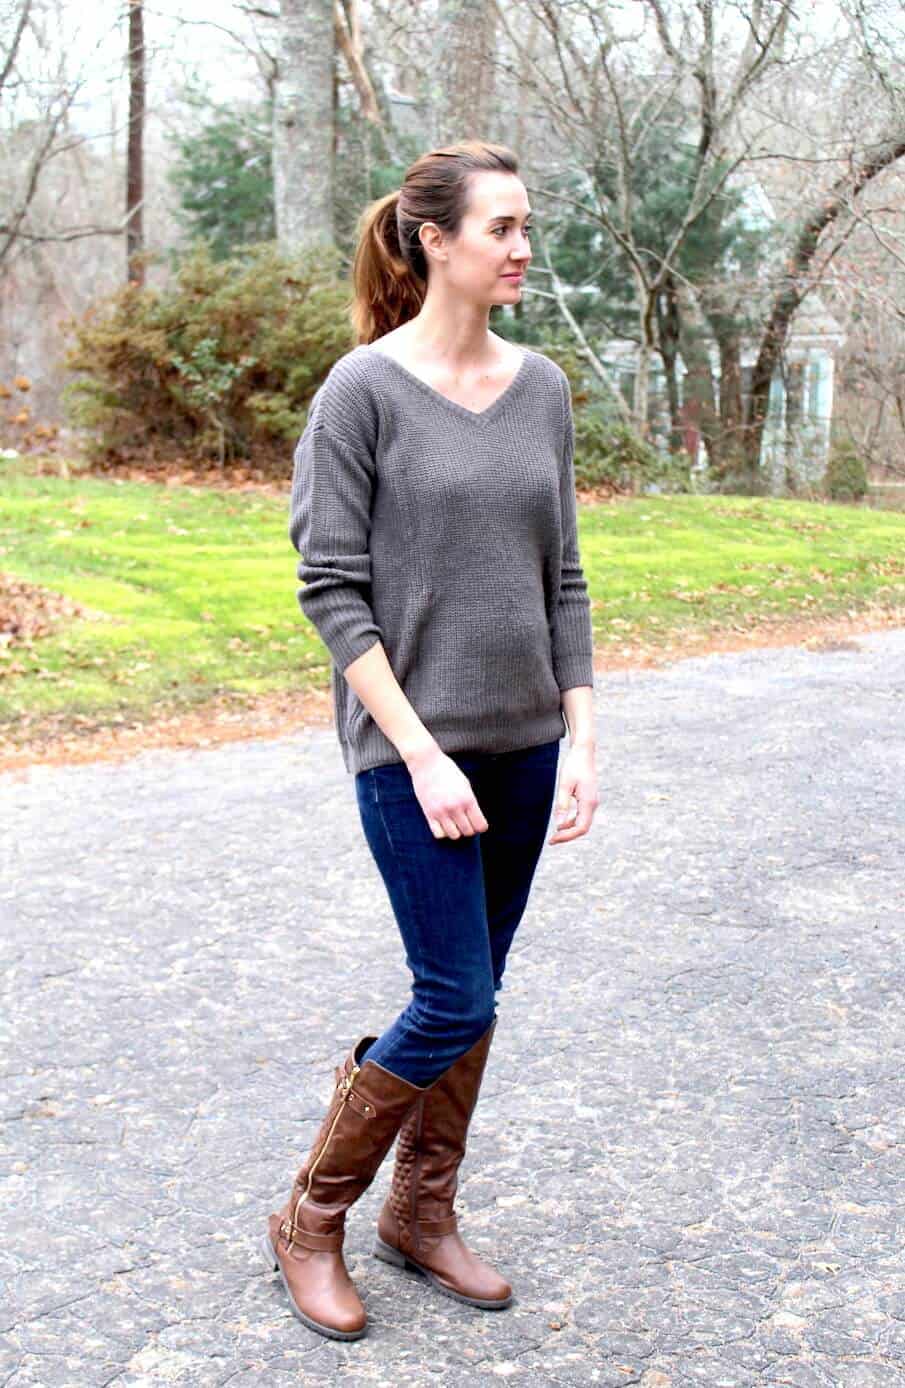 Woman wears grey maternity sweater and brown knee high boots.